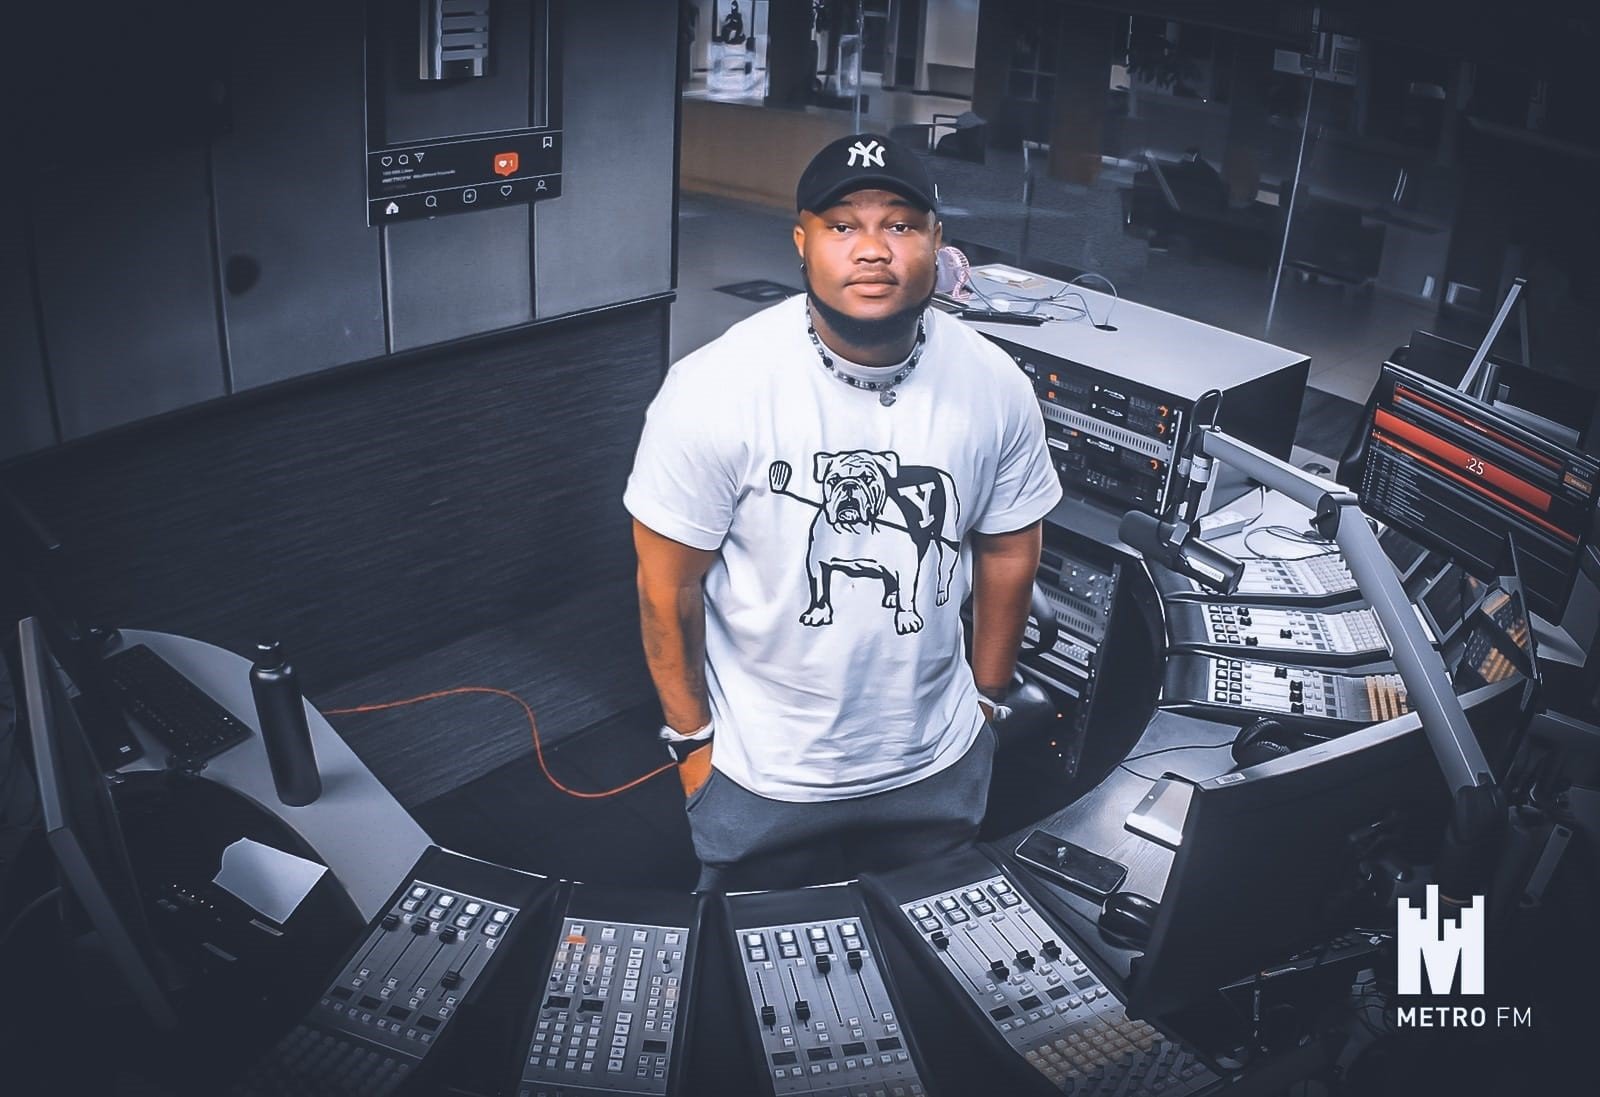 Metro FM's DJ Sabby escapes the latest round of radio chops and changes